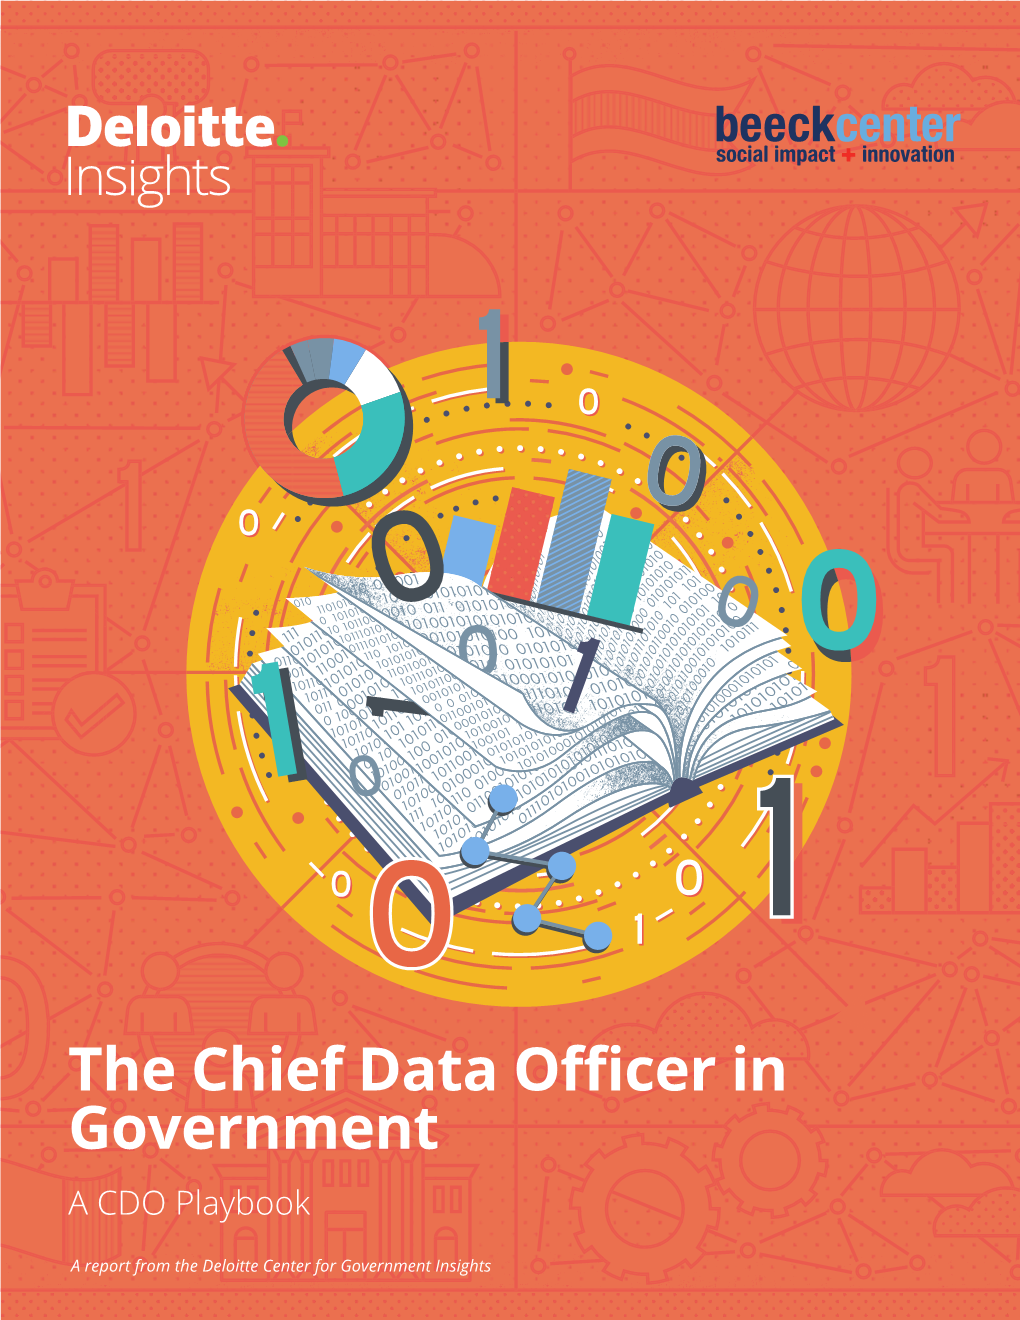 The Chief Data Officer in Government a CDO Playbook